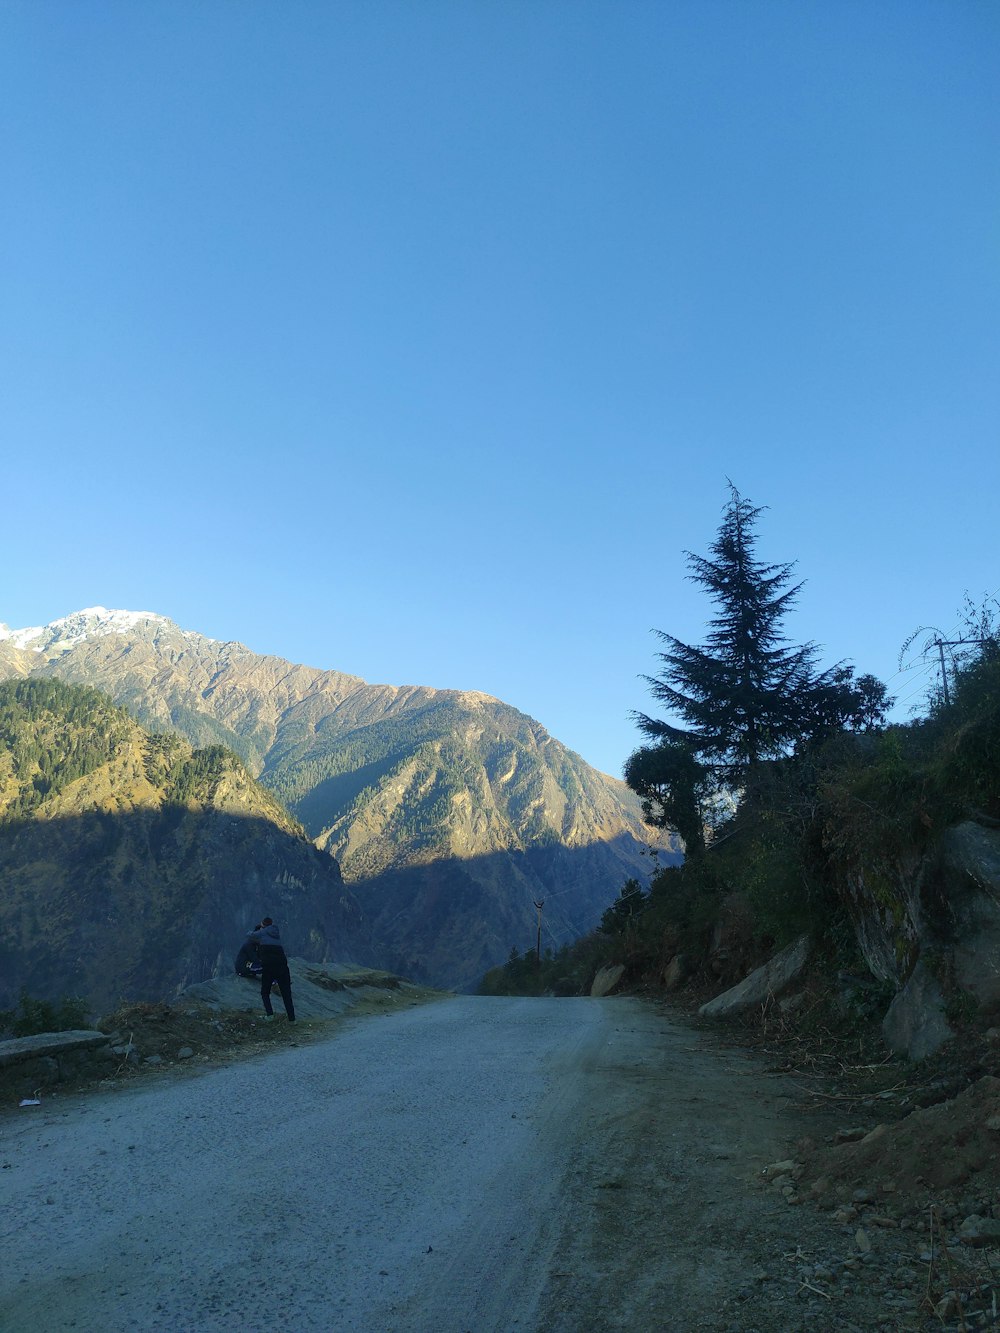 a person standing on a dirt road in front of mountains